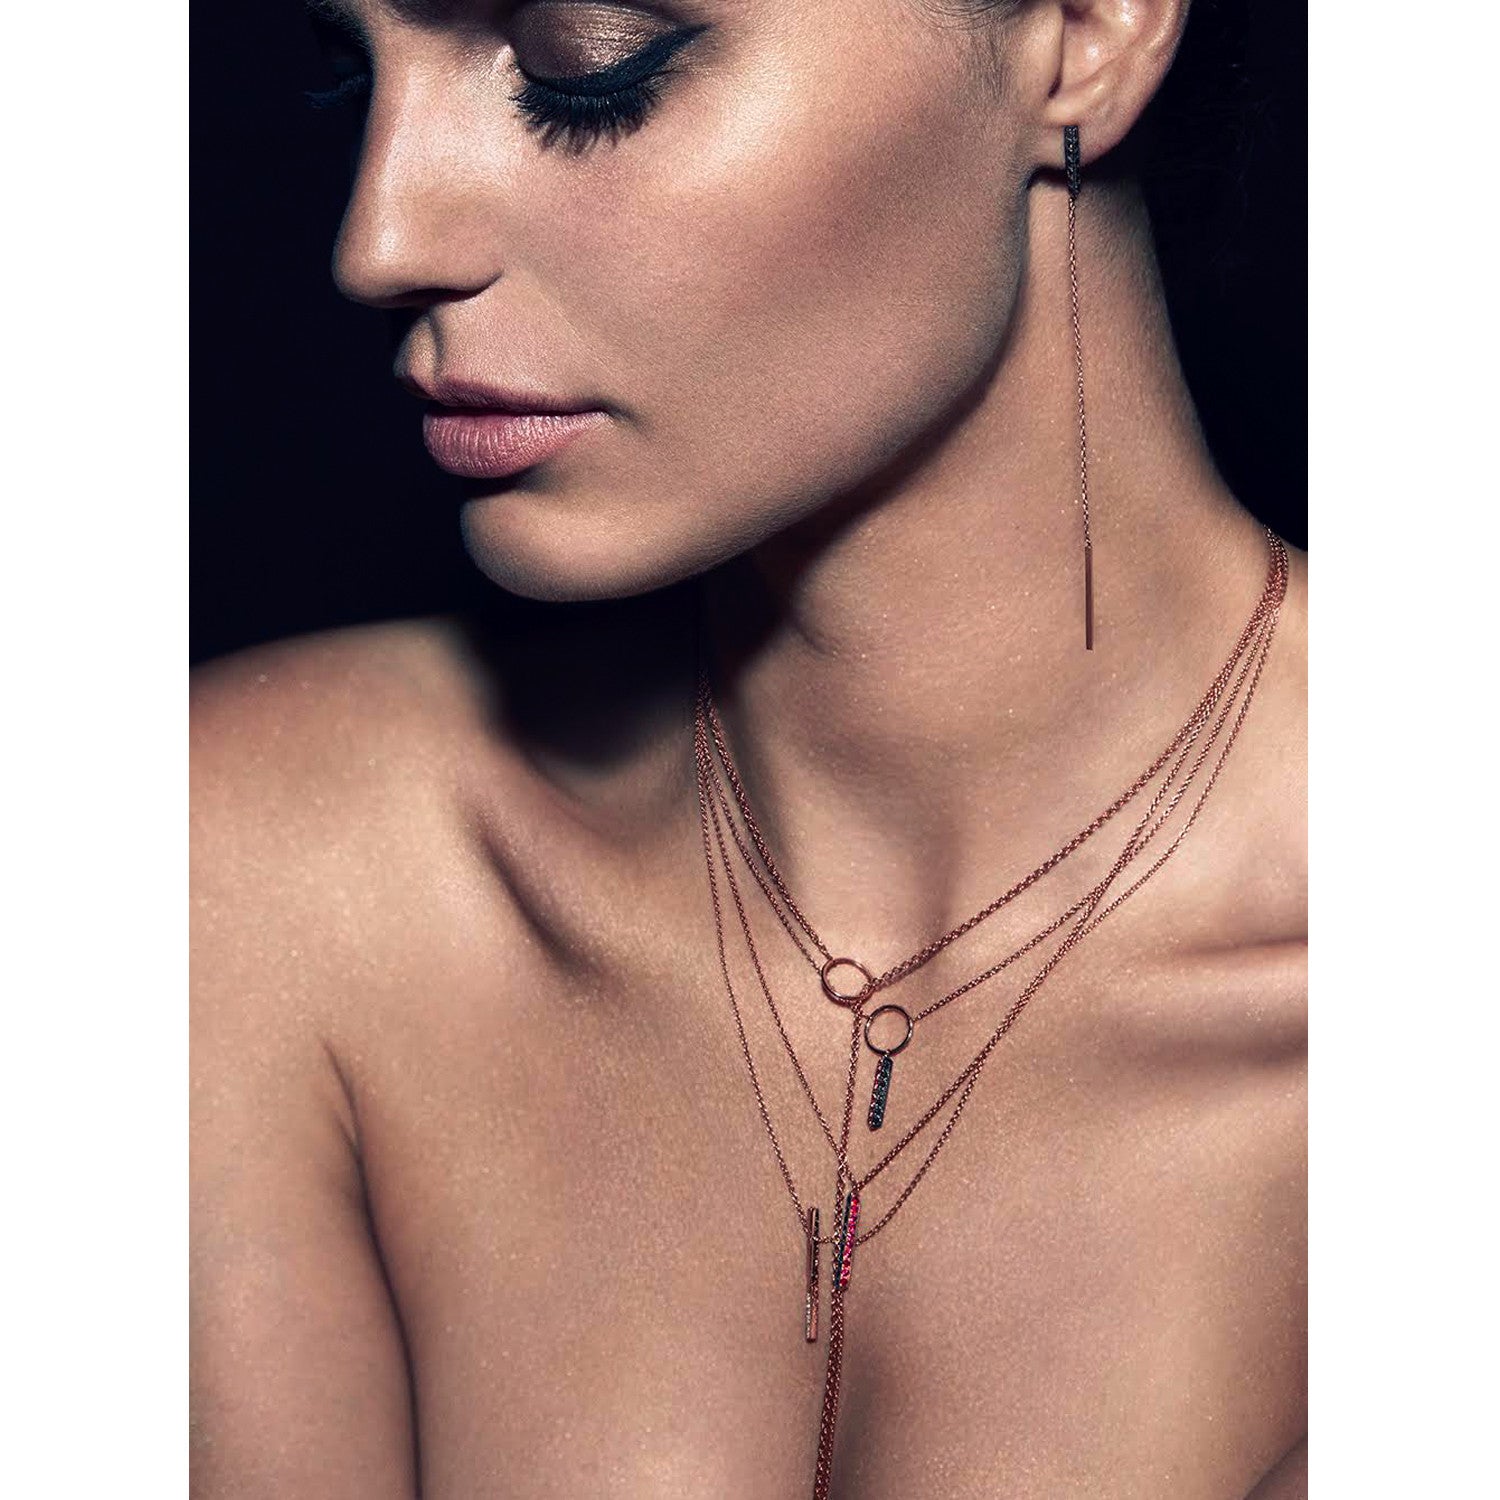 Selin Kent 14K Marlene Necklace with Black Diamonds and Rubies - On Model